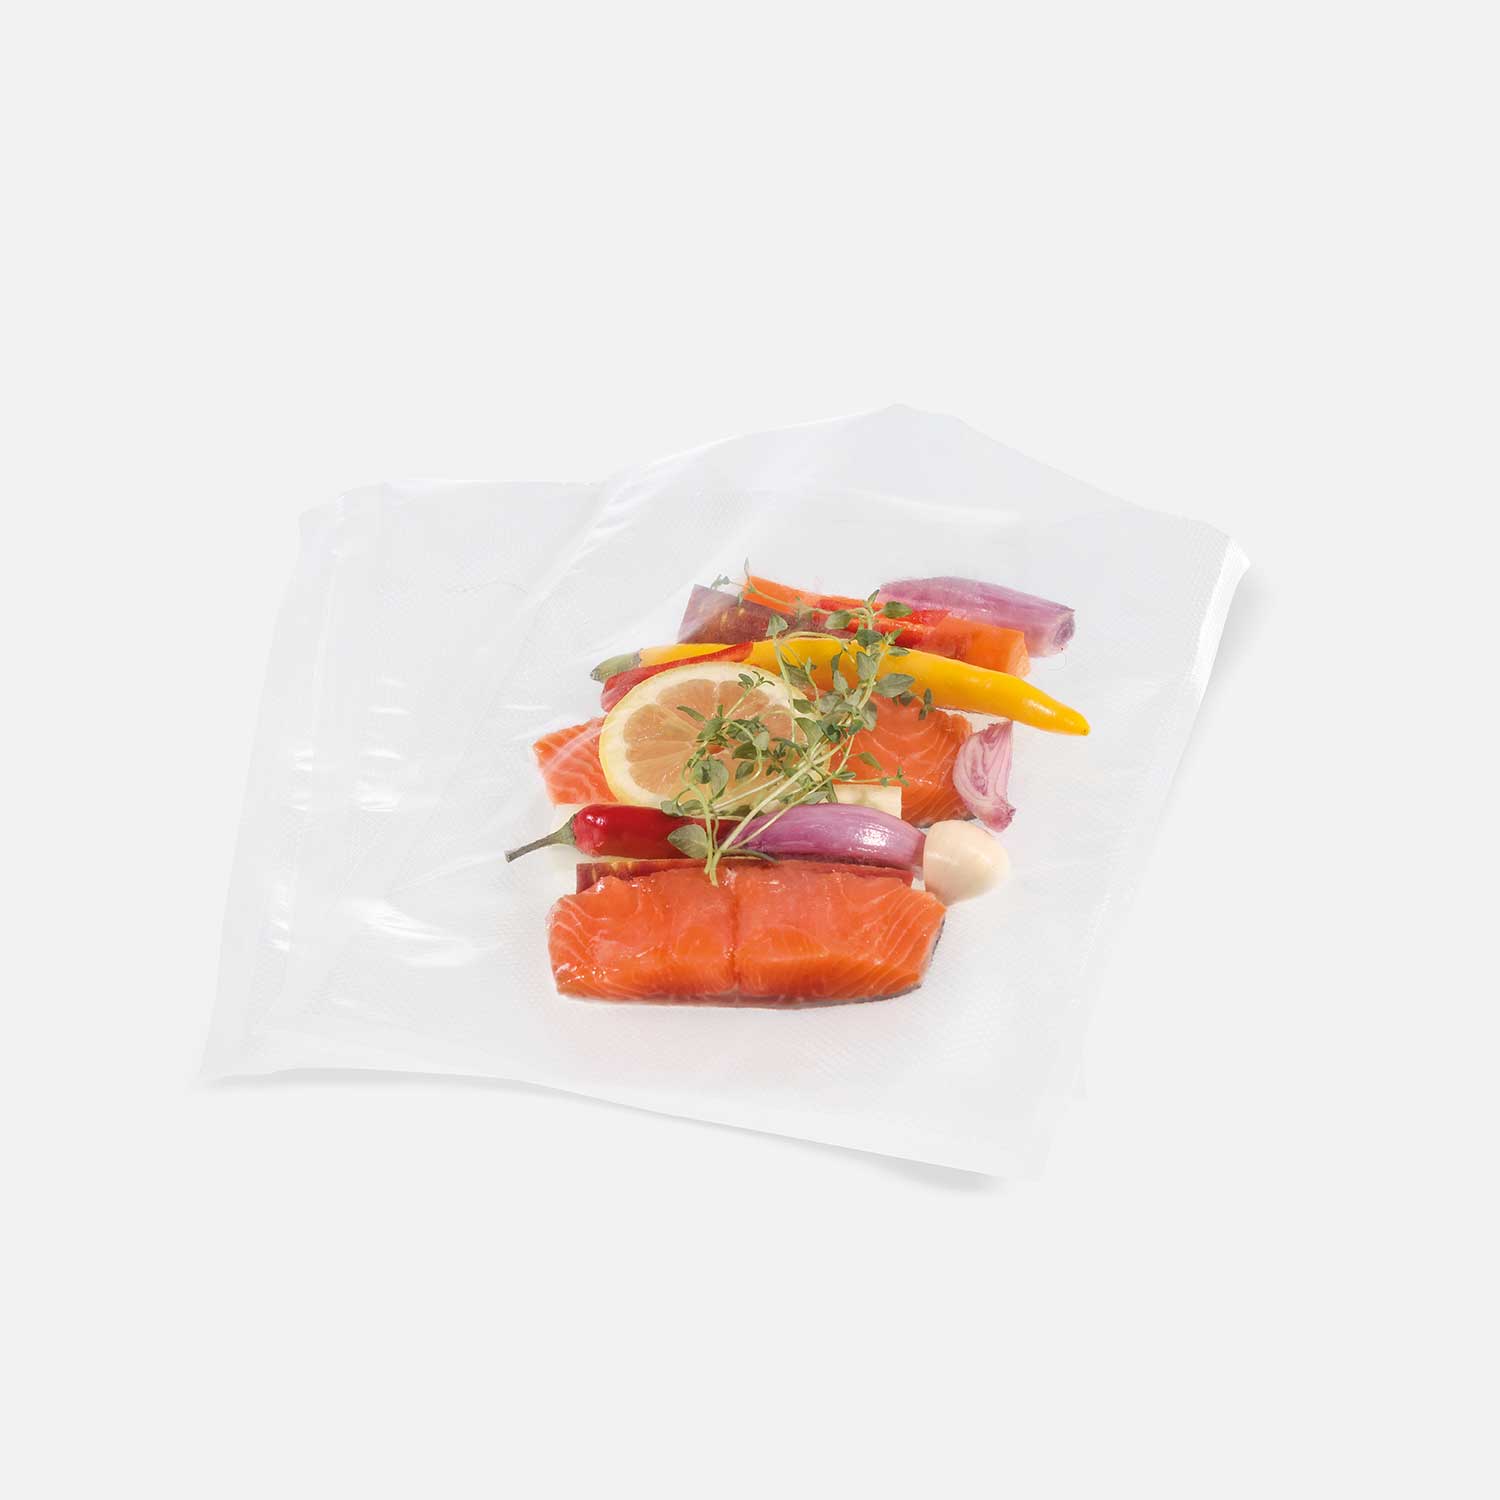 H-Vac vacuum cooking bags with food for sous-vide cooking not yet vacuum-sealed